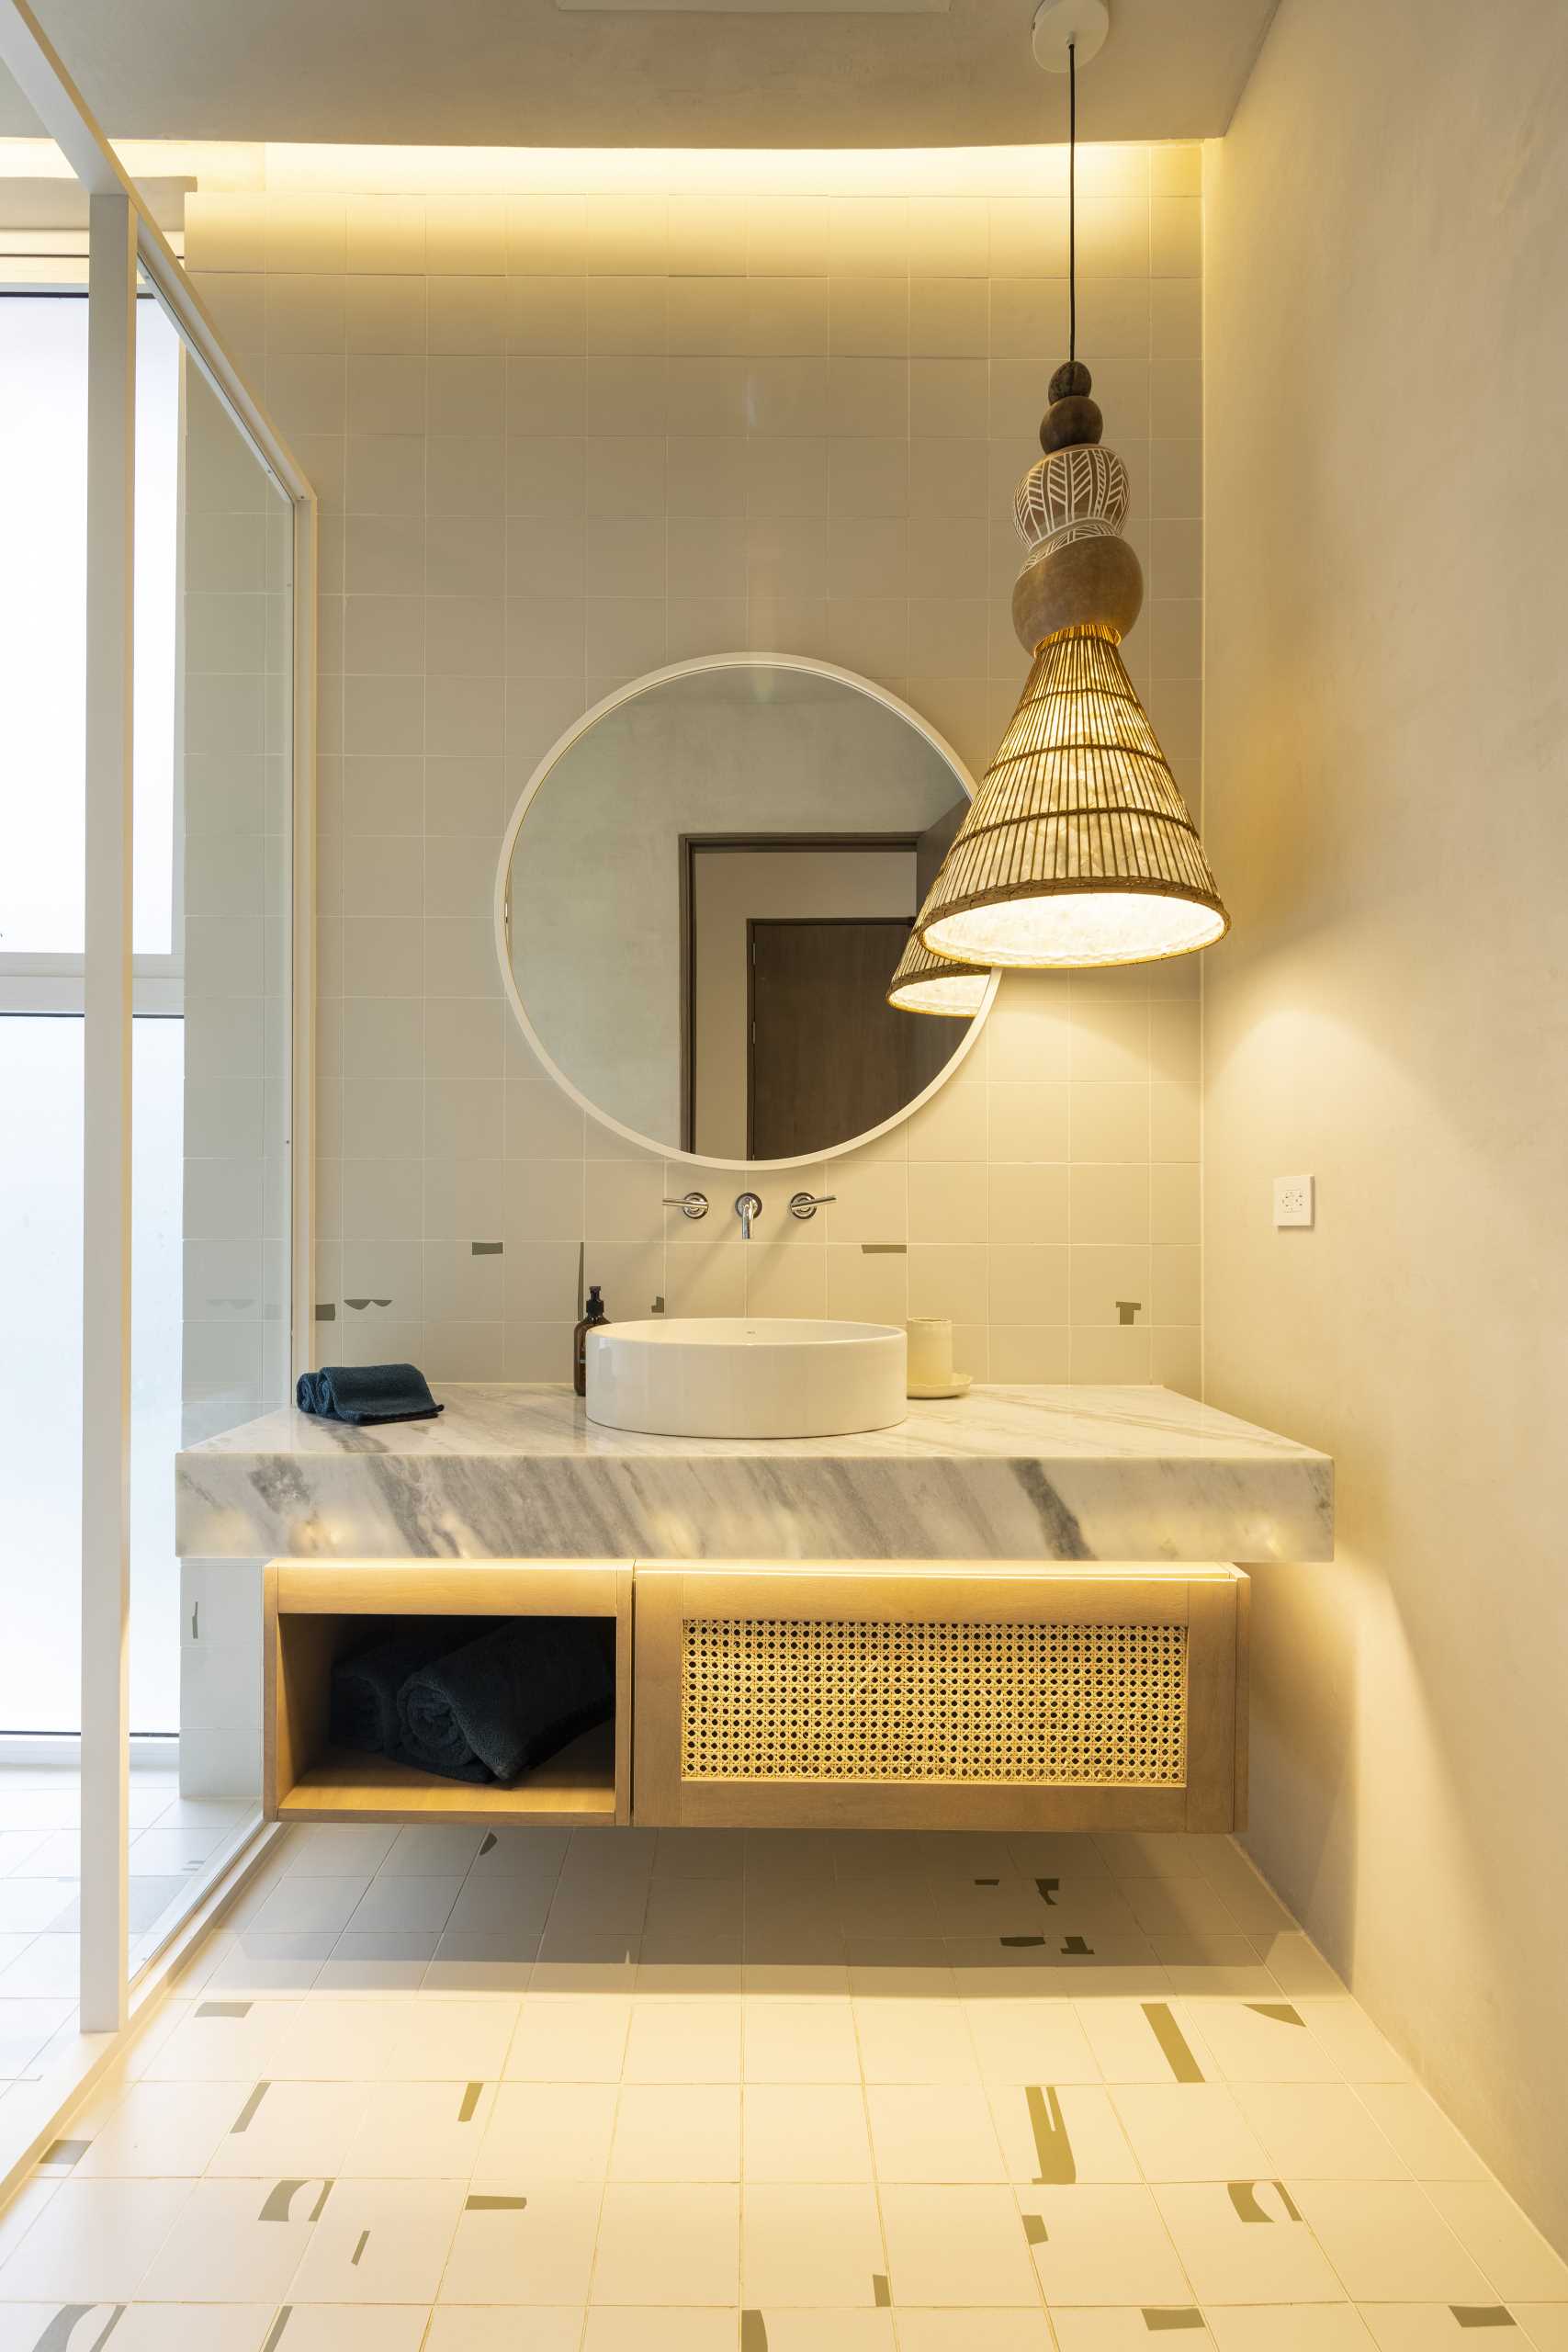 A modern bathroom with hidden lighting, a floating vanity, and a walk-in shower.